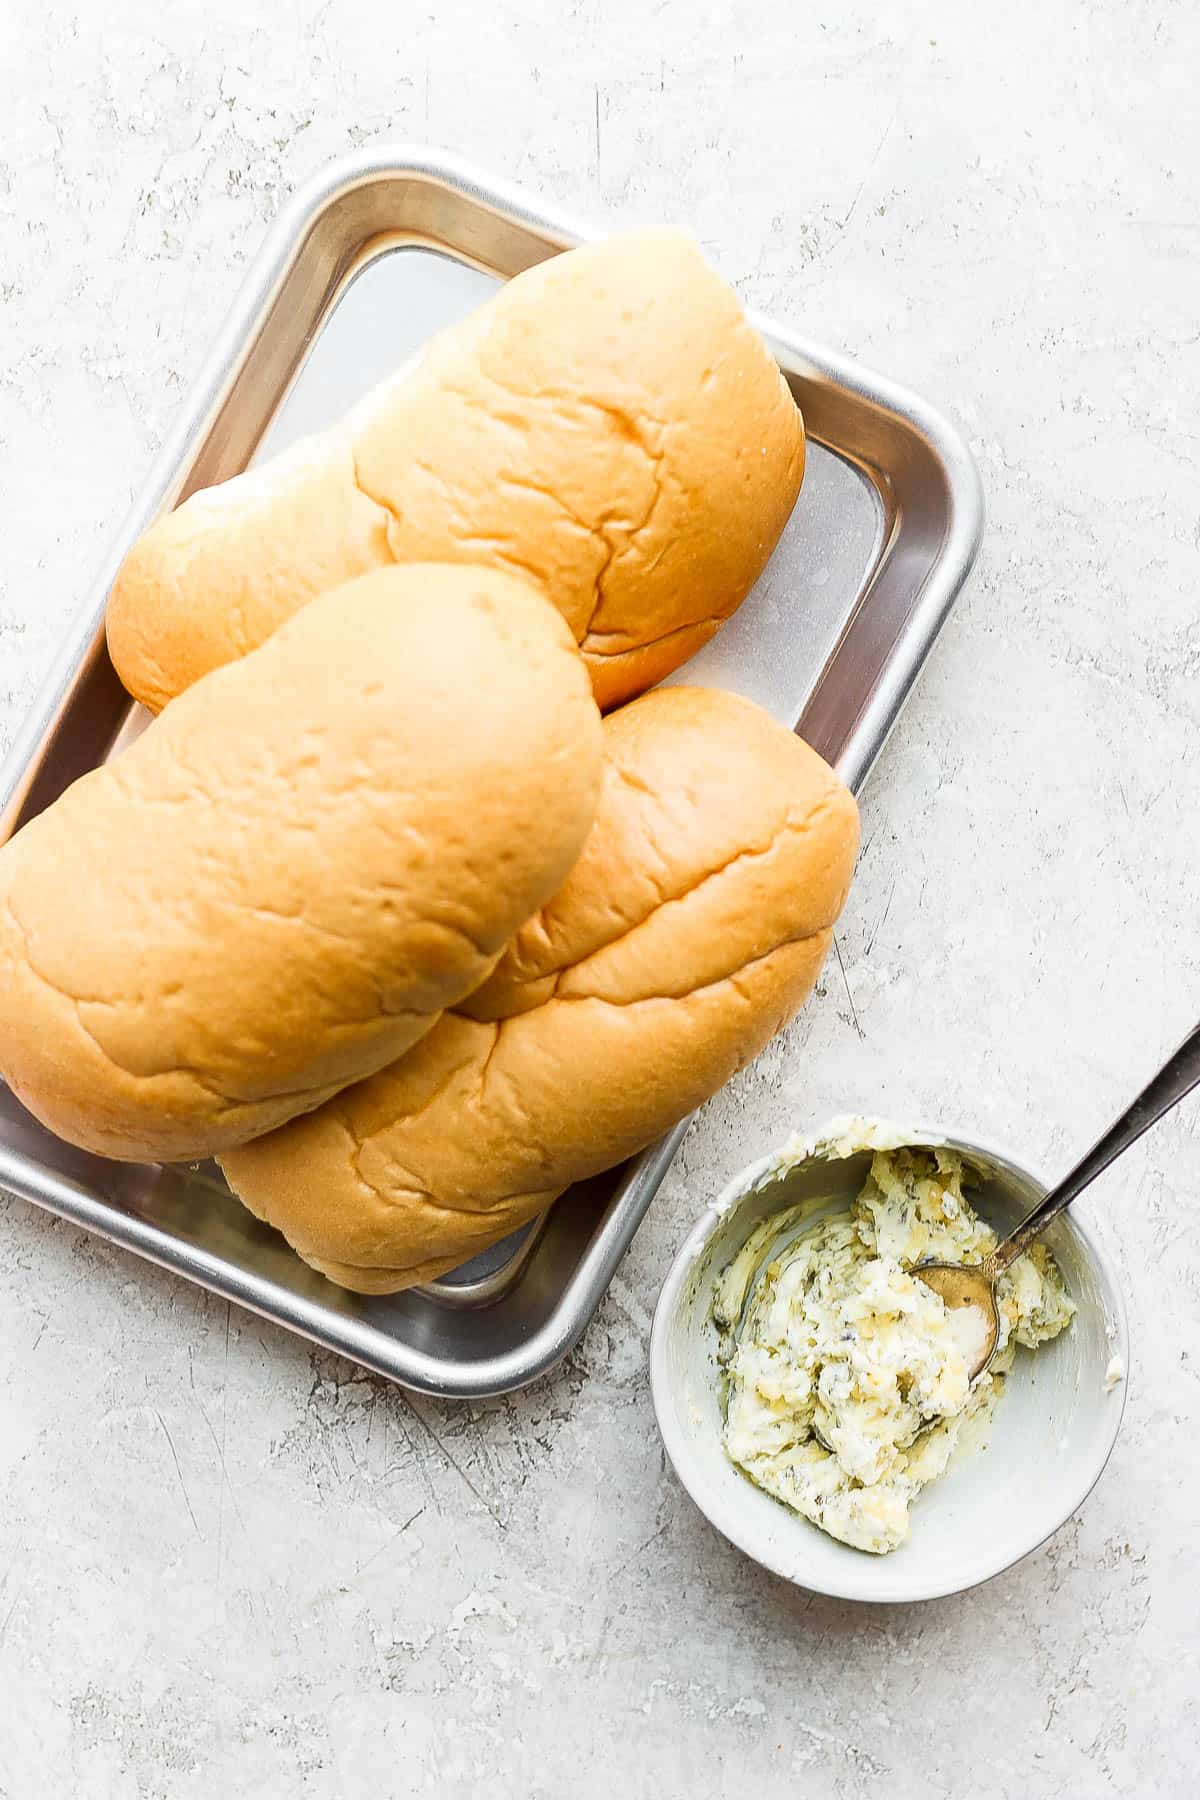 Three hoagie buns on a counter with a bowl of herbed butter on the side.